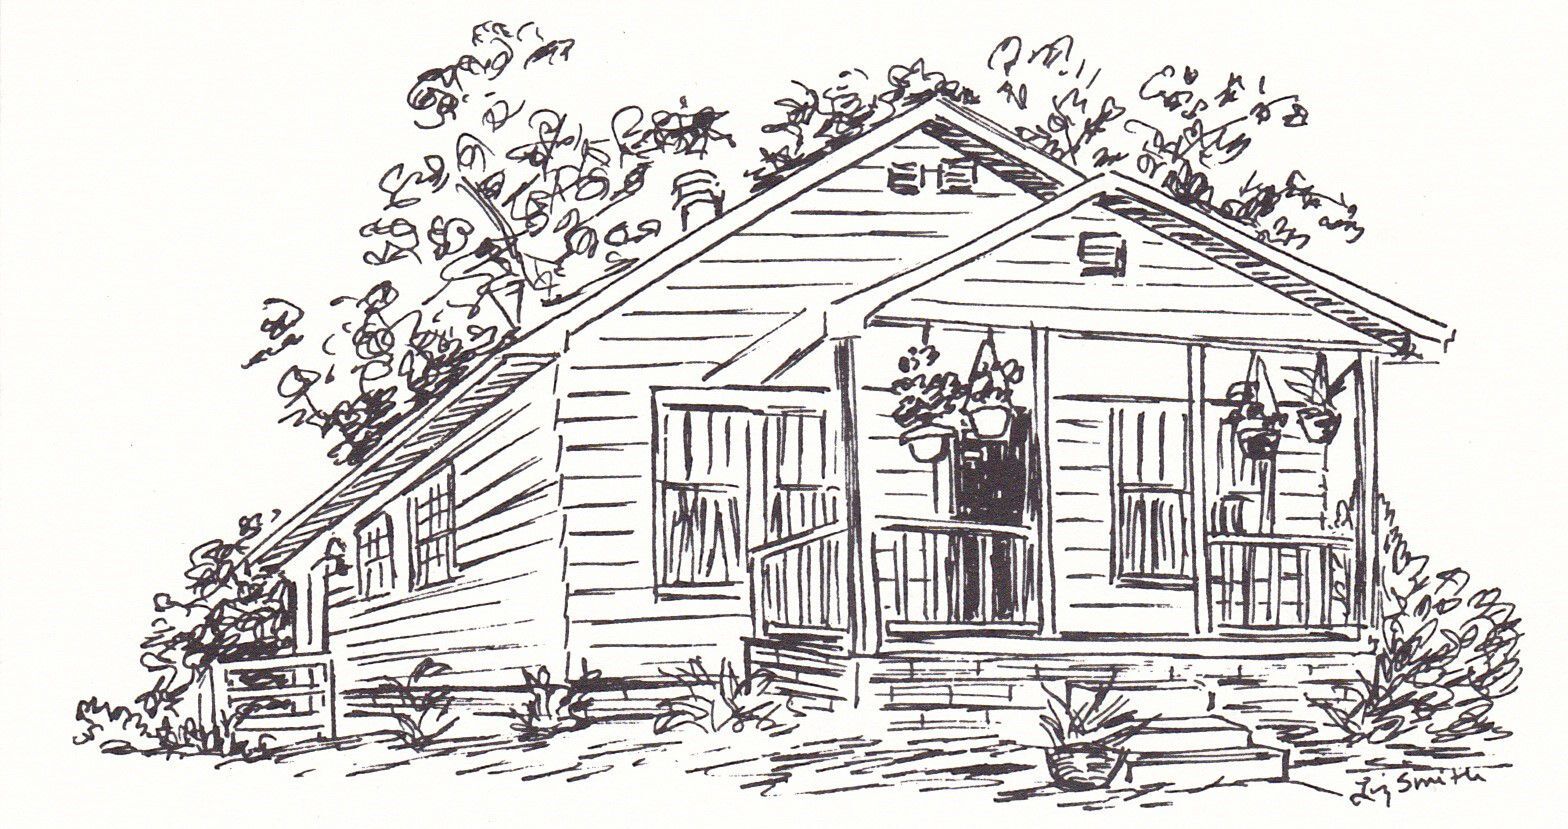 Ink drawing of a house